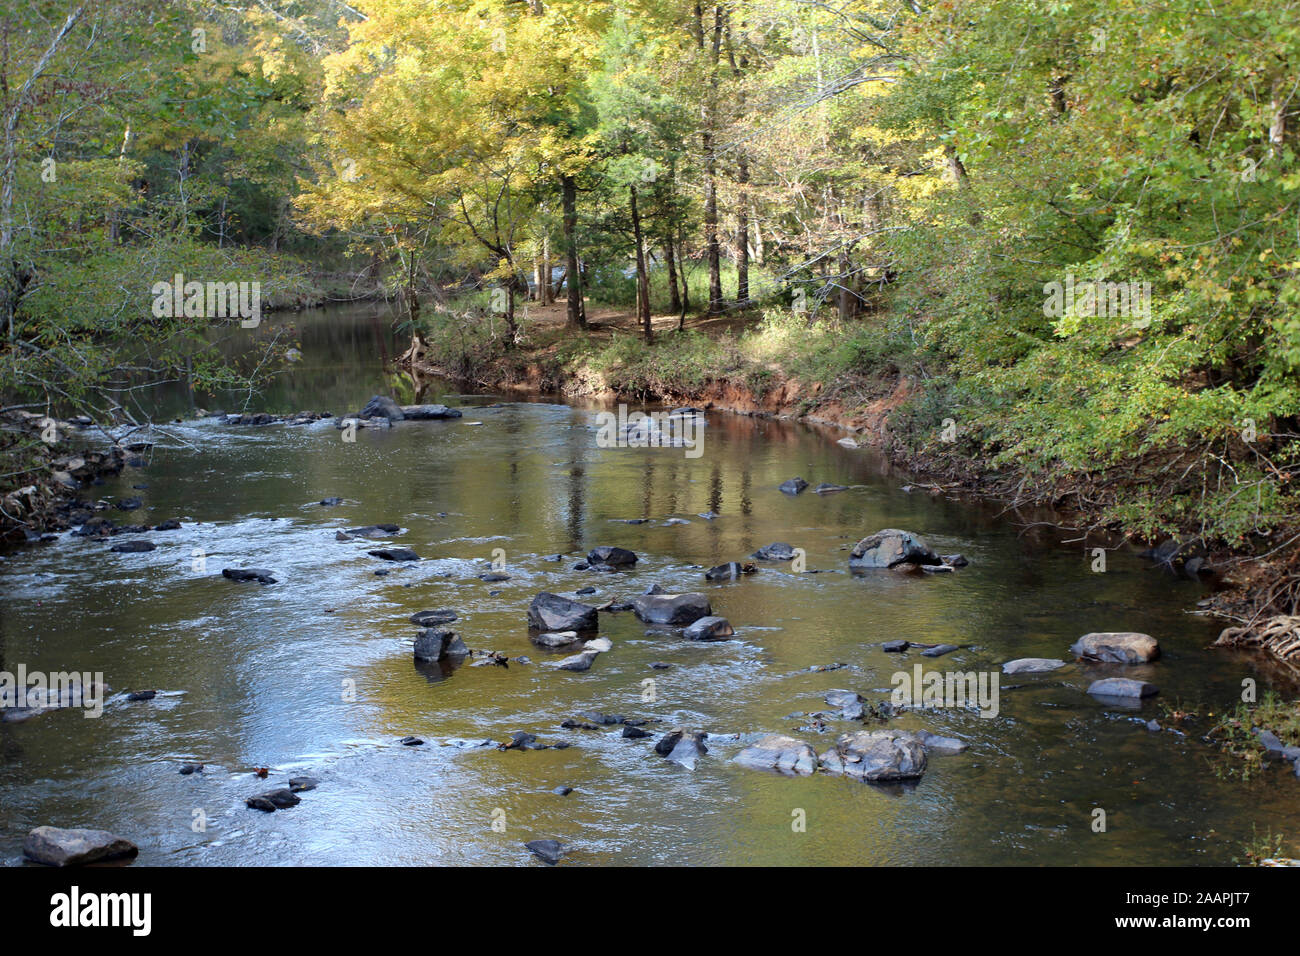 The Eno River flowing through a forest in Eno River State Park, North Carolina, USA, on a sunny day Stock Photo